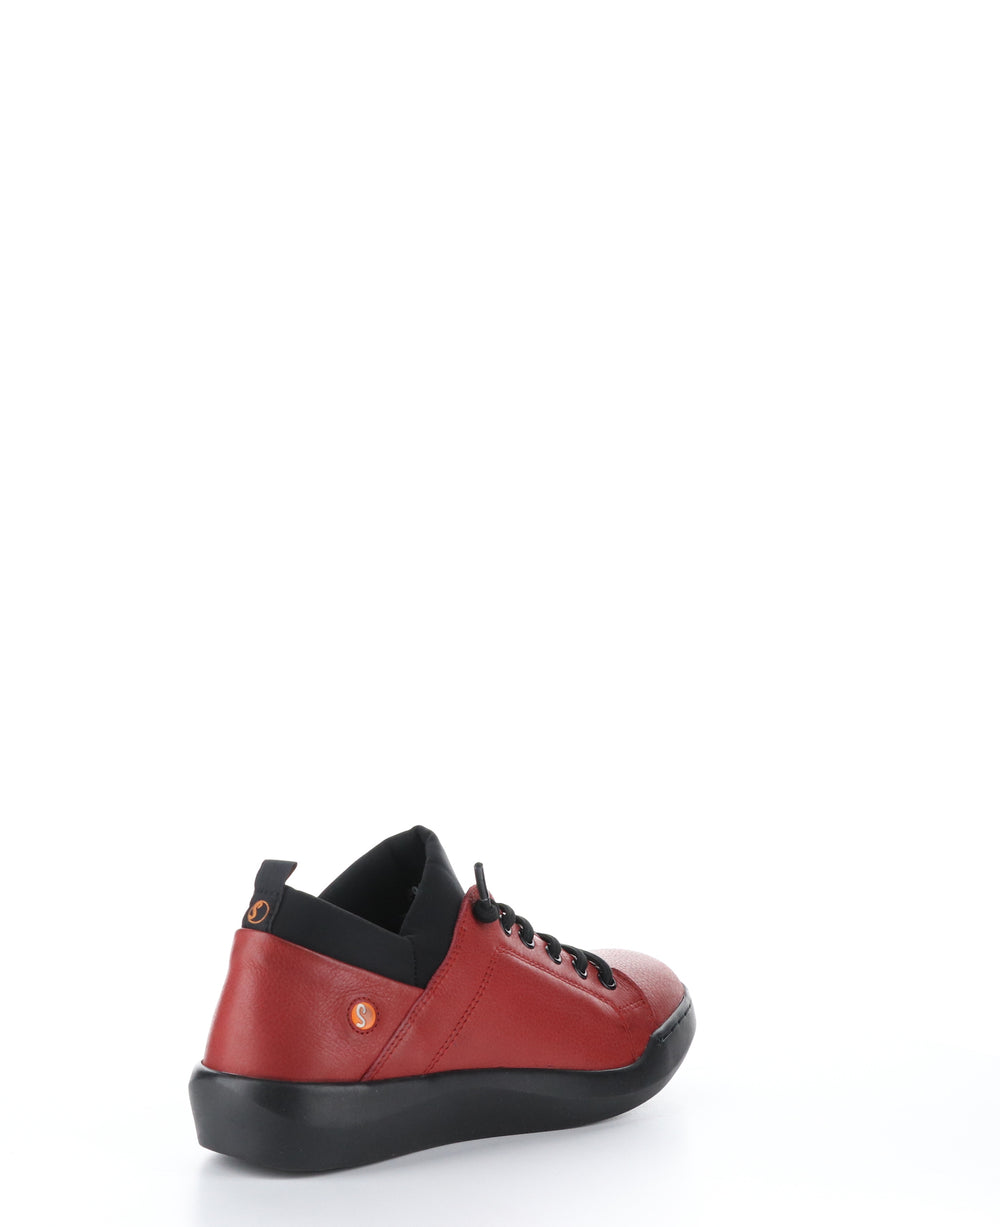 BONN667SOF Red Round Toe Shoes|BONN667SOF Chaussures à Bout Rond in Rouge